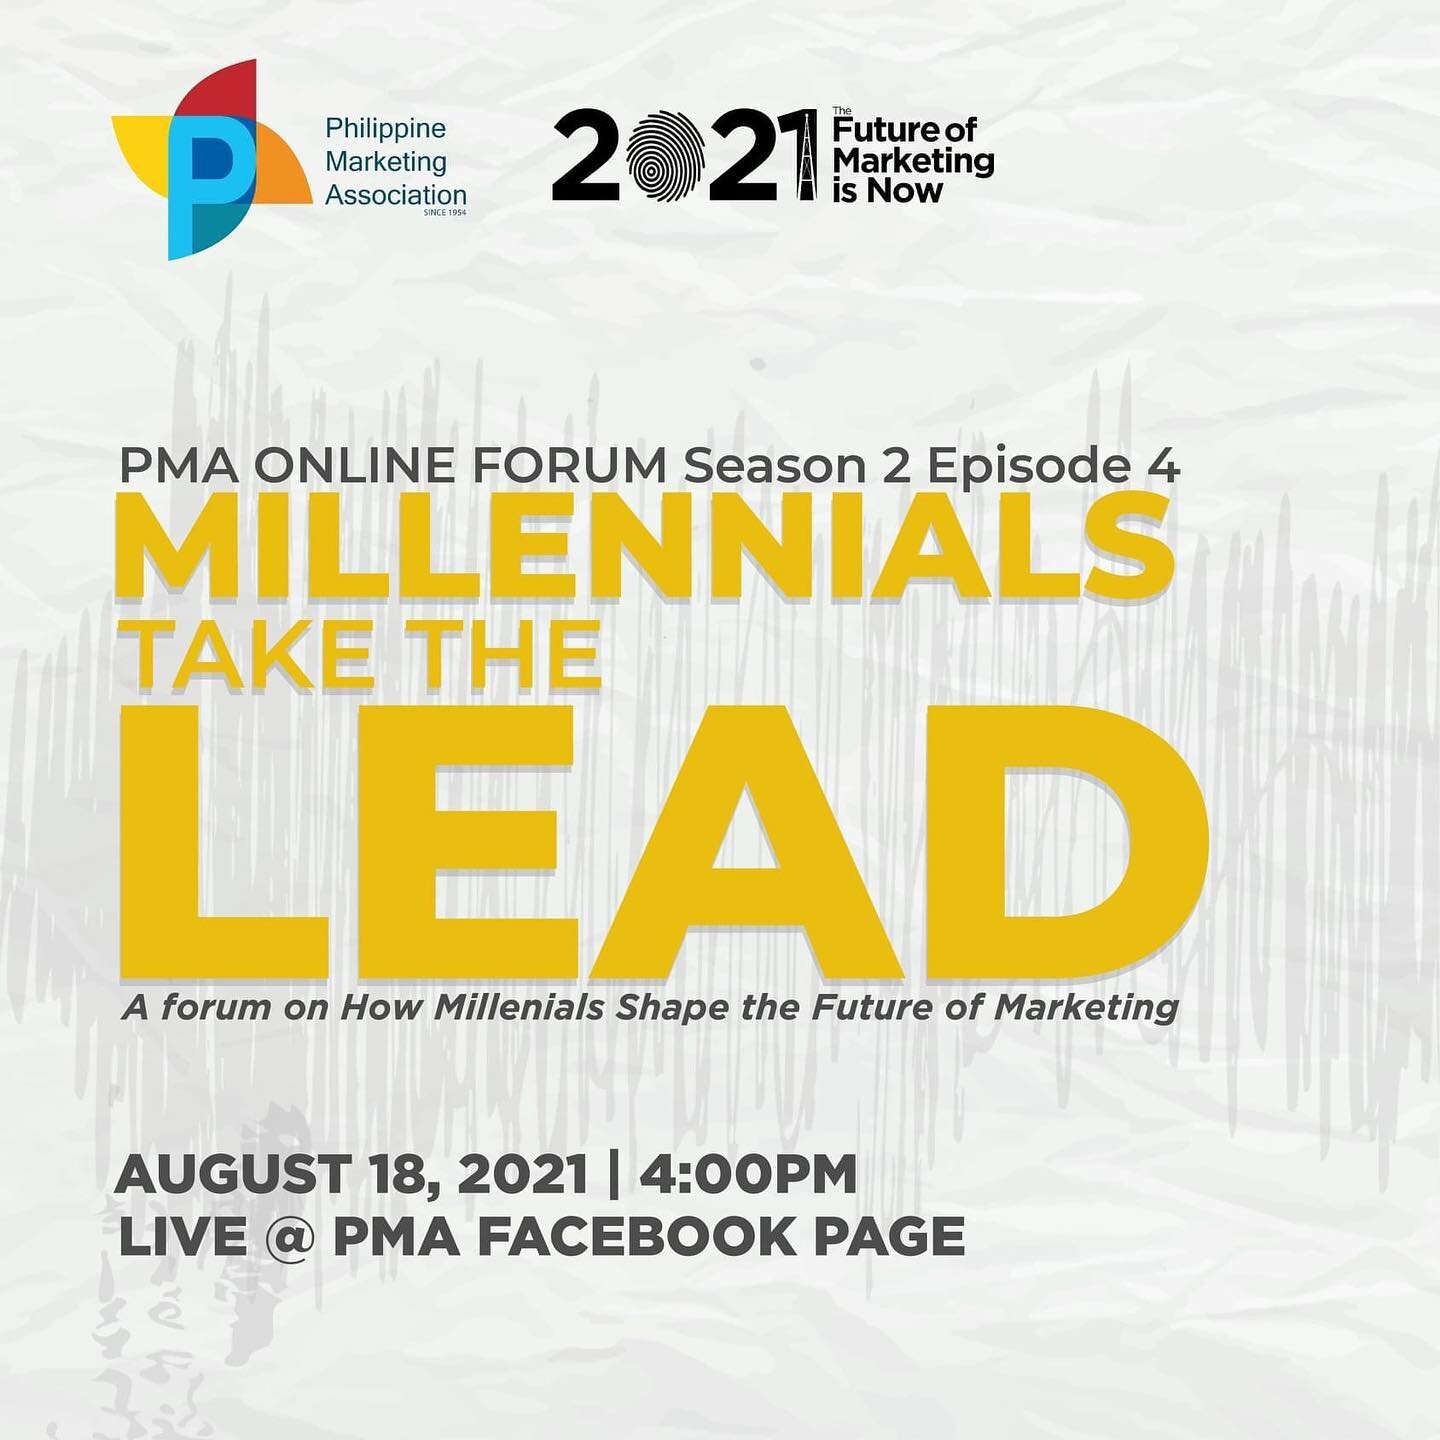 The Philippines ' next generation of leaders is getting younger and younger. According to the National Statistics, Millennials and GenZ now composed 70% of the country's population. 

For this next forum, we shall be talking about how can we stay rel